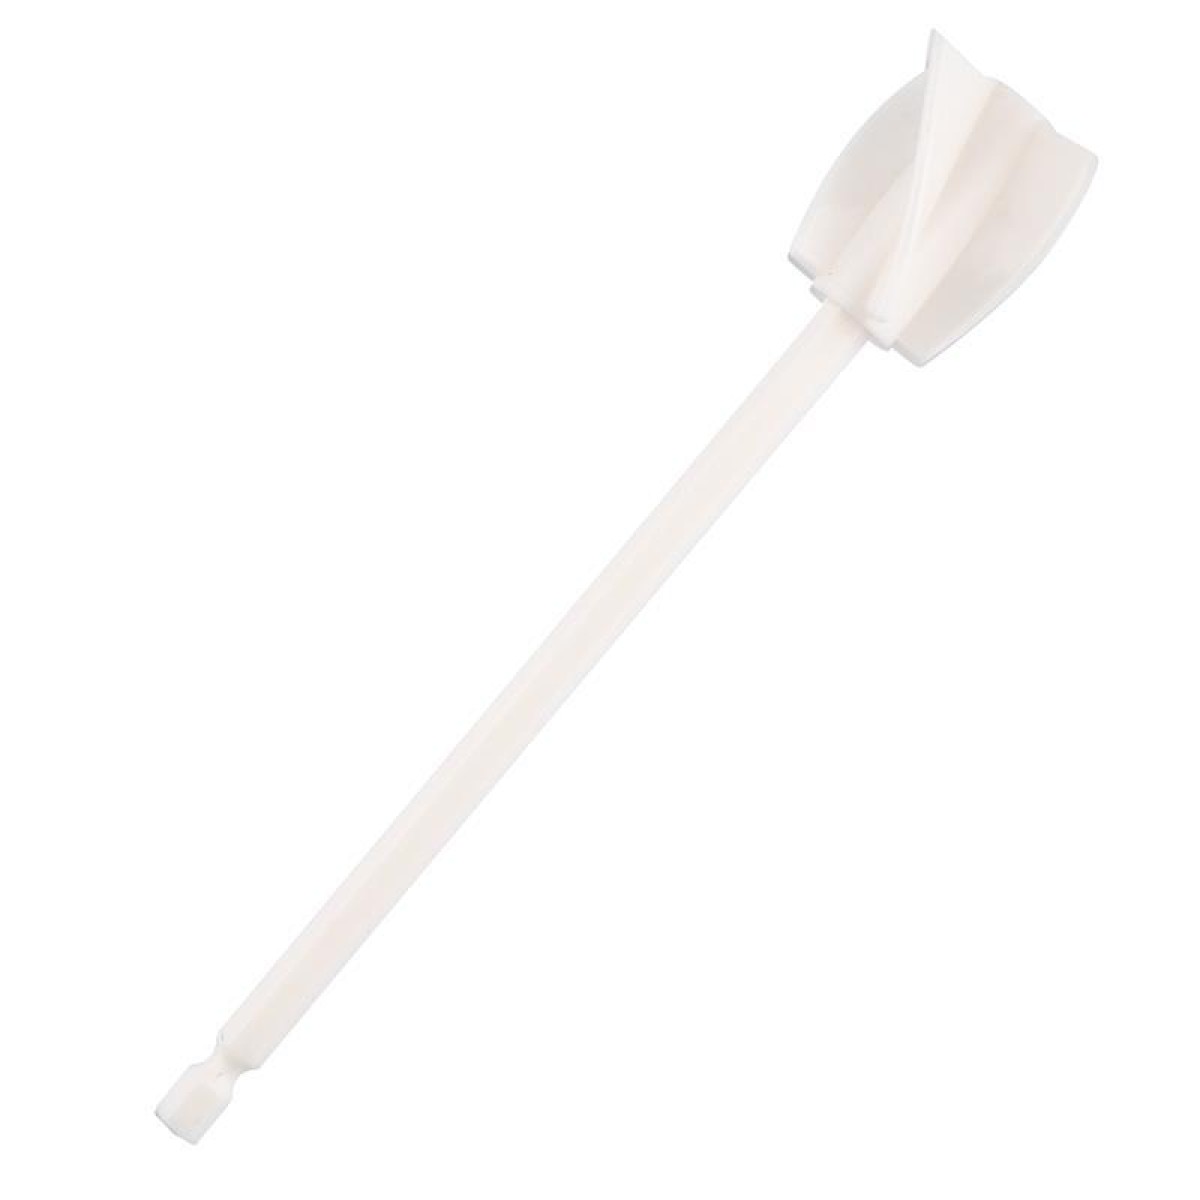 Paint and Resin Epoxy Mixer Paddle Attachment for Drill(White)